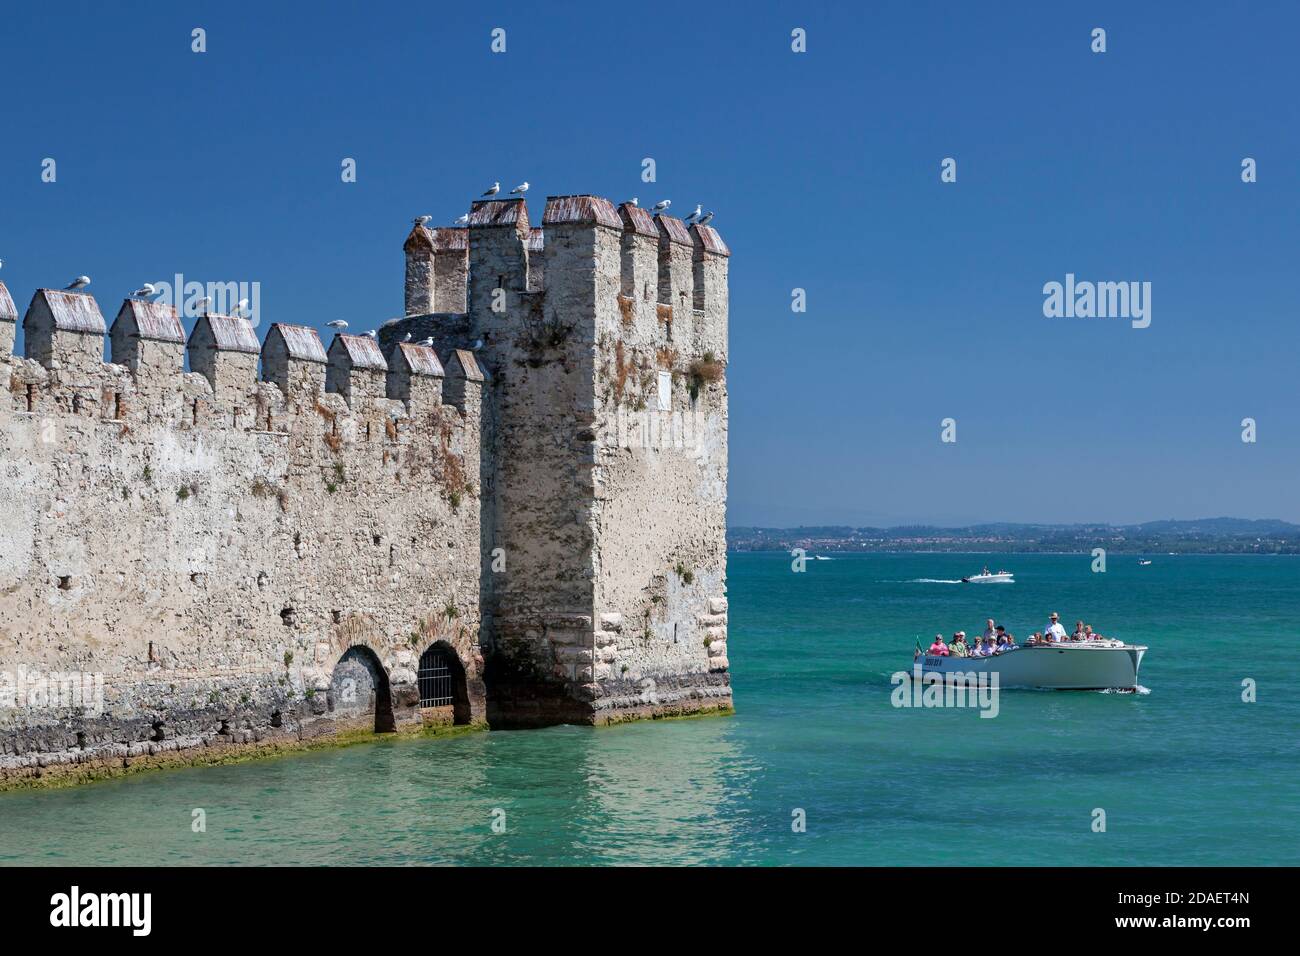 Geographie / Reisen, Italien, Lombardei, Sirmione, Gardasee, Castello Scaligero in Sirmione, Additional-Rights-Clearance-Info-not-available Stockfoto